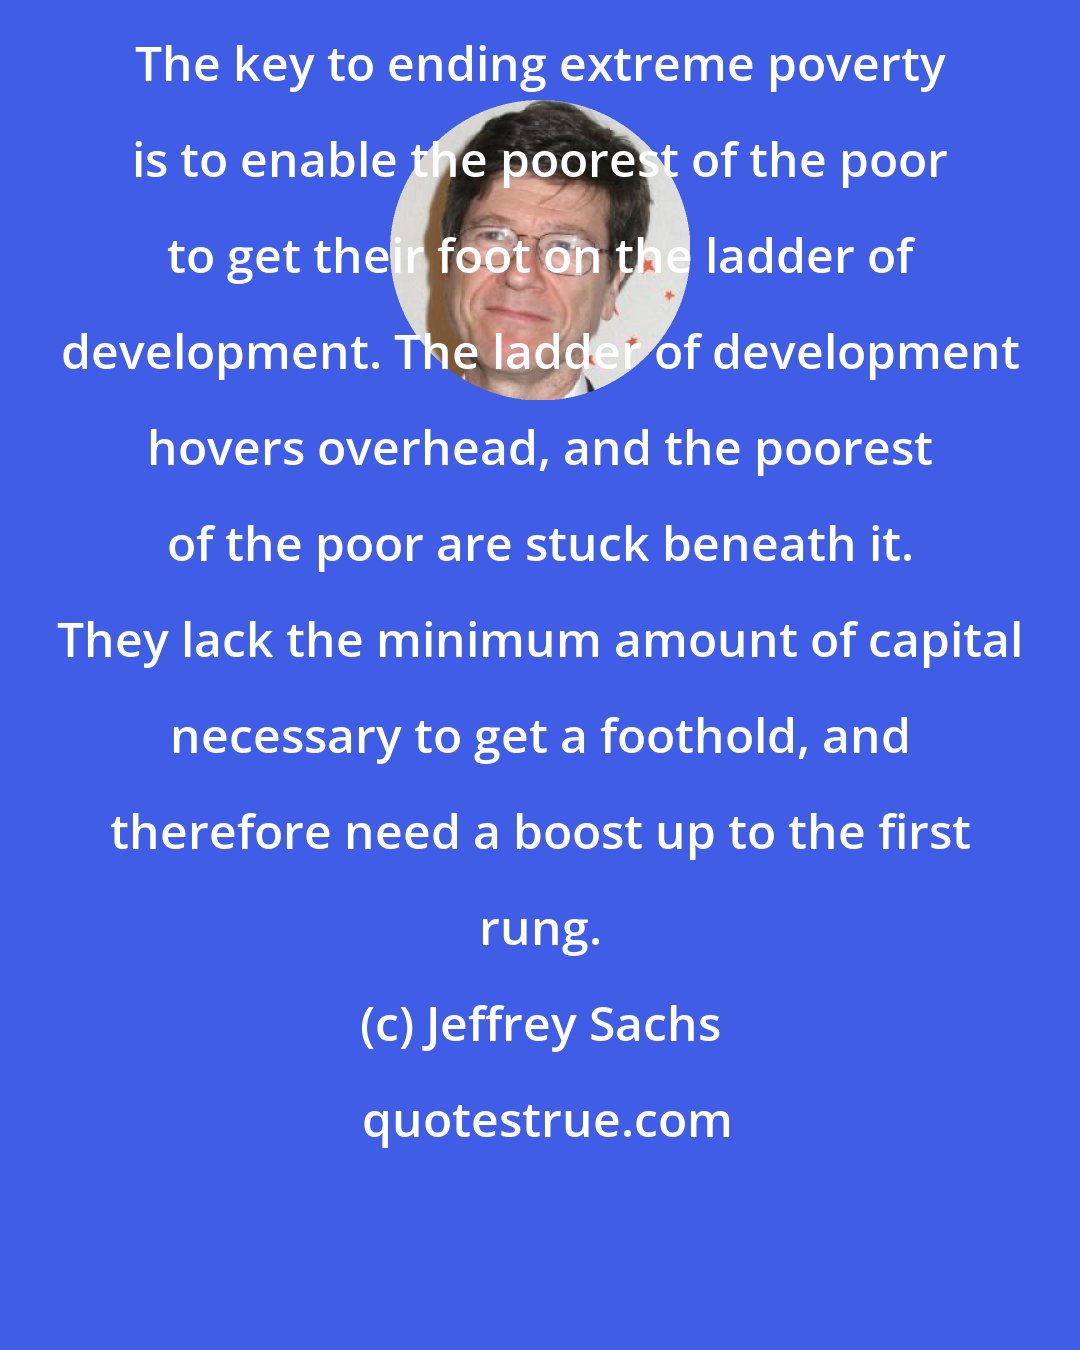 Jeffrey Sachs: The key to ending extreme poverty is to enable the poorest of the poor to get their foot on the ladder of development. The ladder of development hovers overhead, and the poorest of the poor are stuck beneath it. They lack the minimum amount of capital necessary to get a foothold, and therefore need a boost up to the first rung.